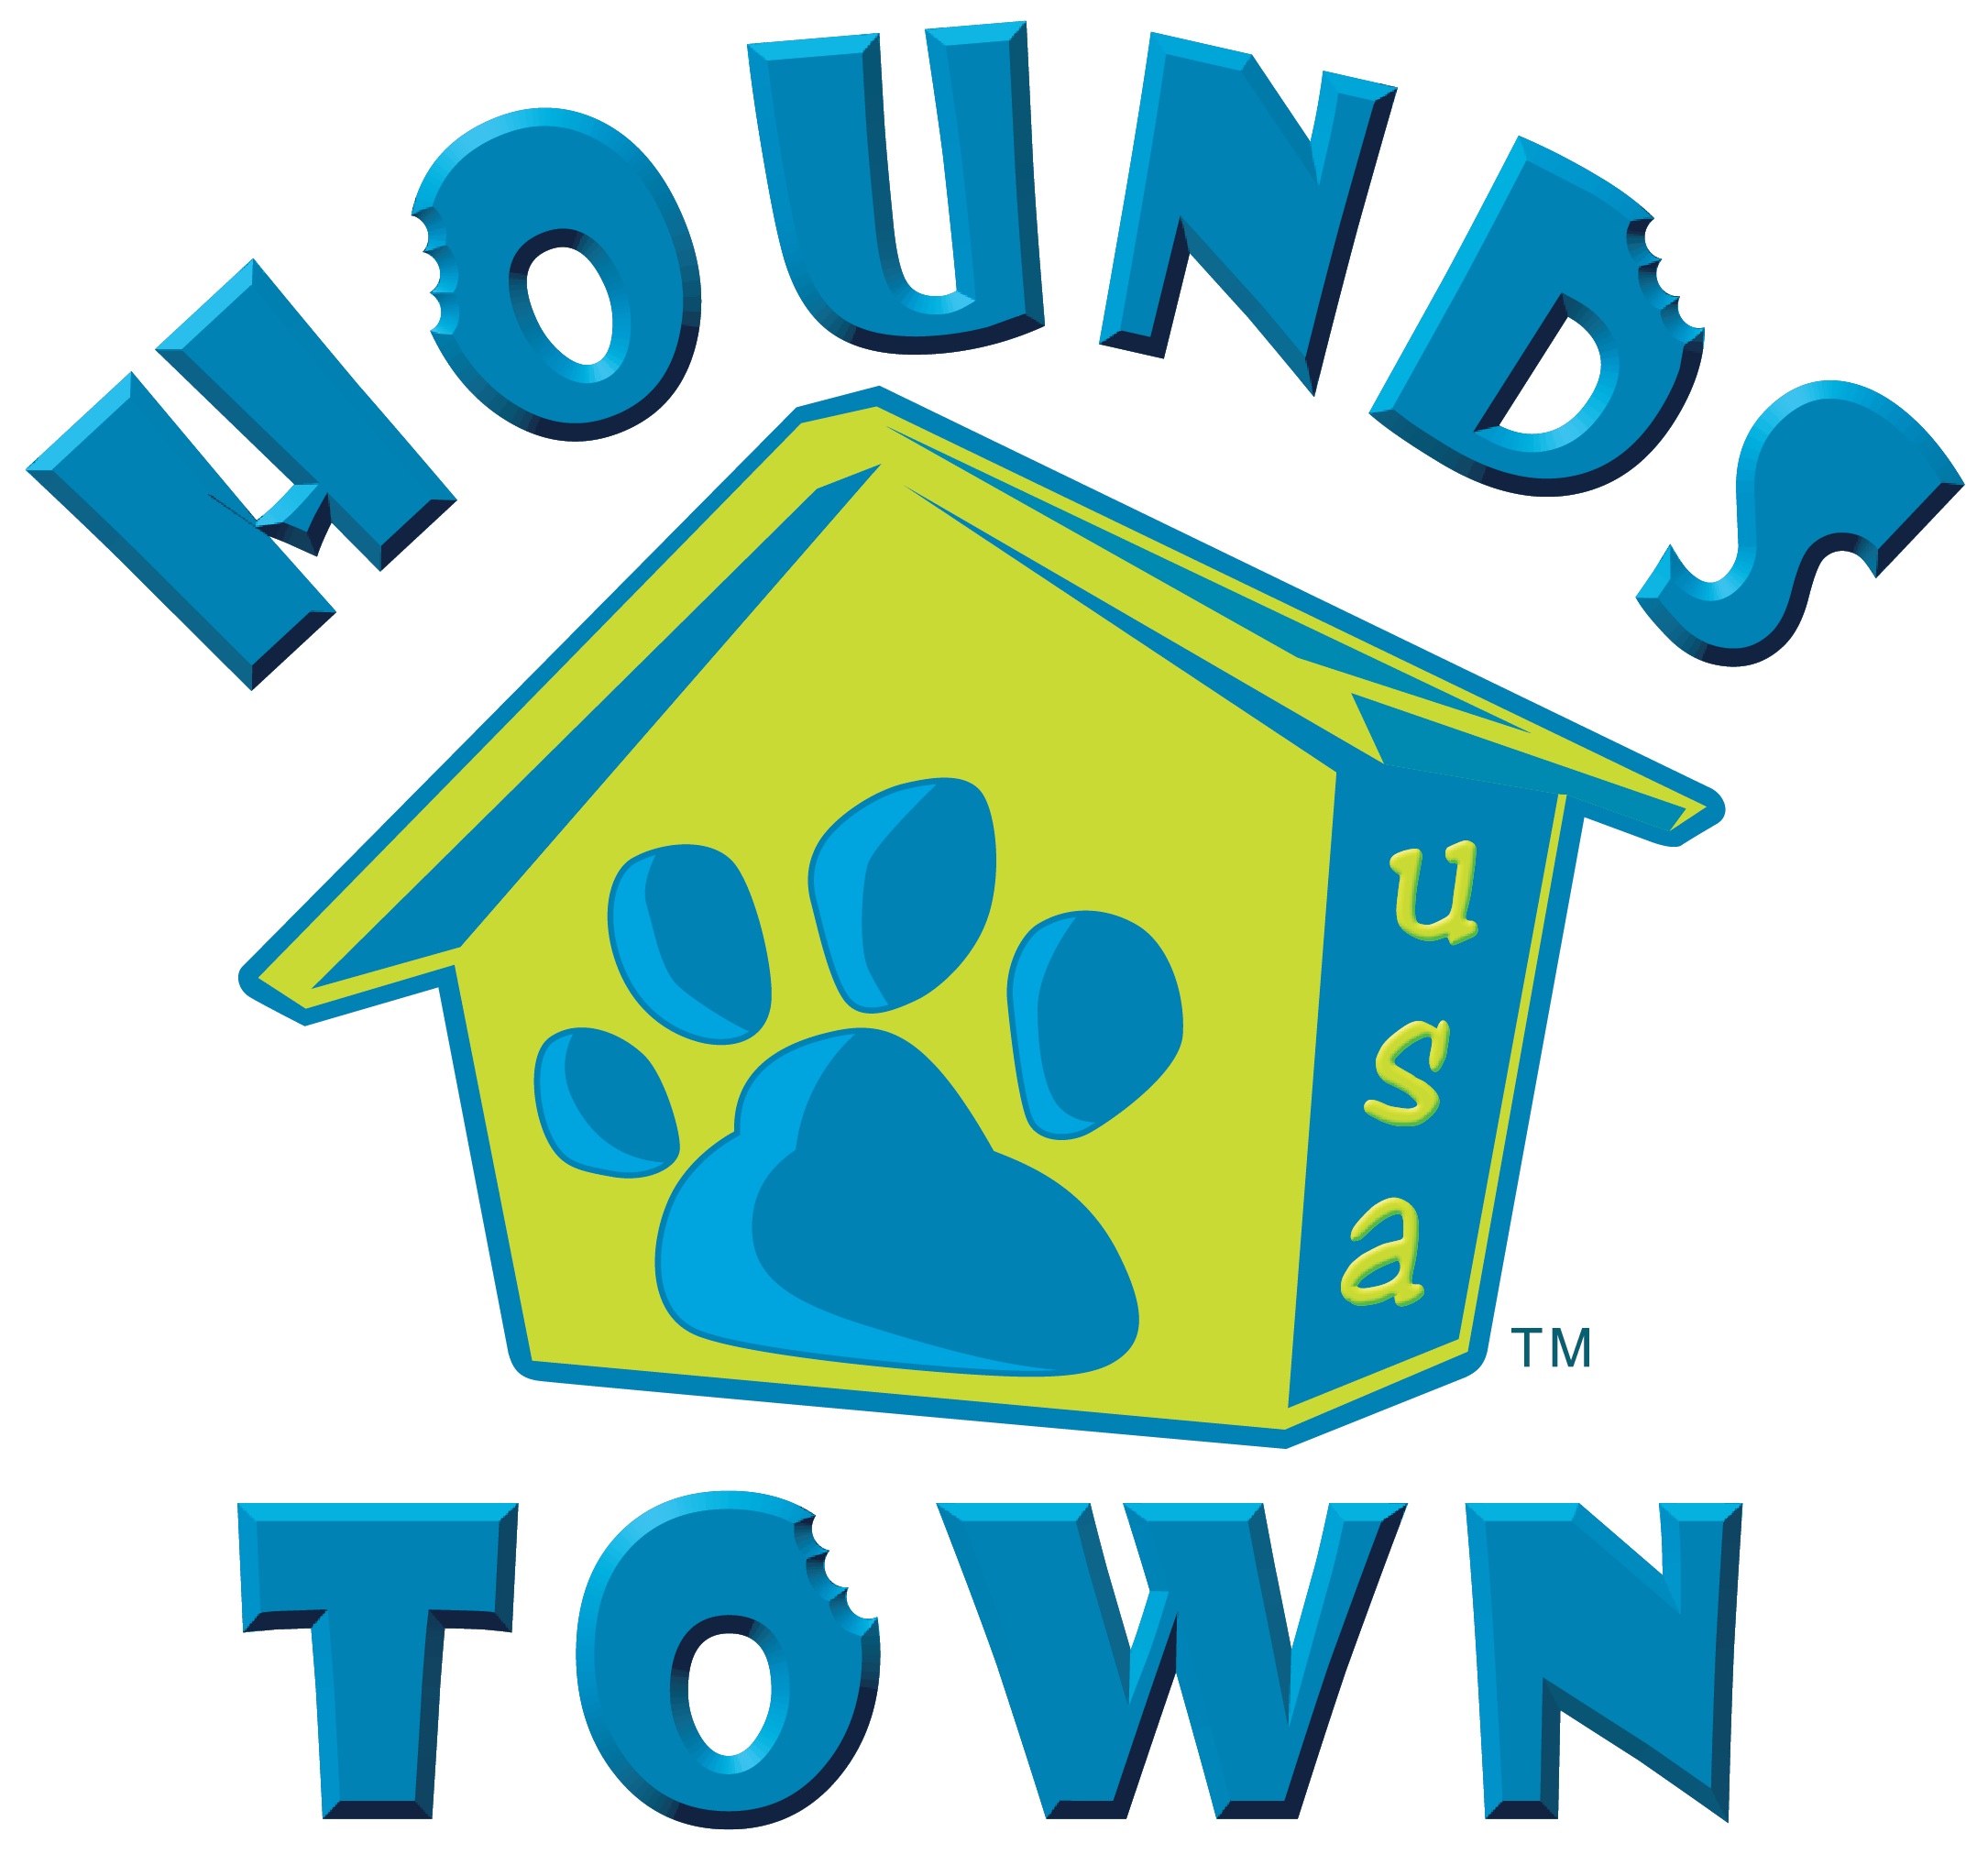 hounds town doghouse logo and word art graphic